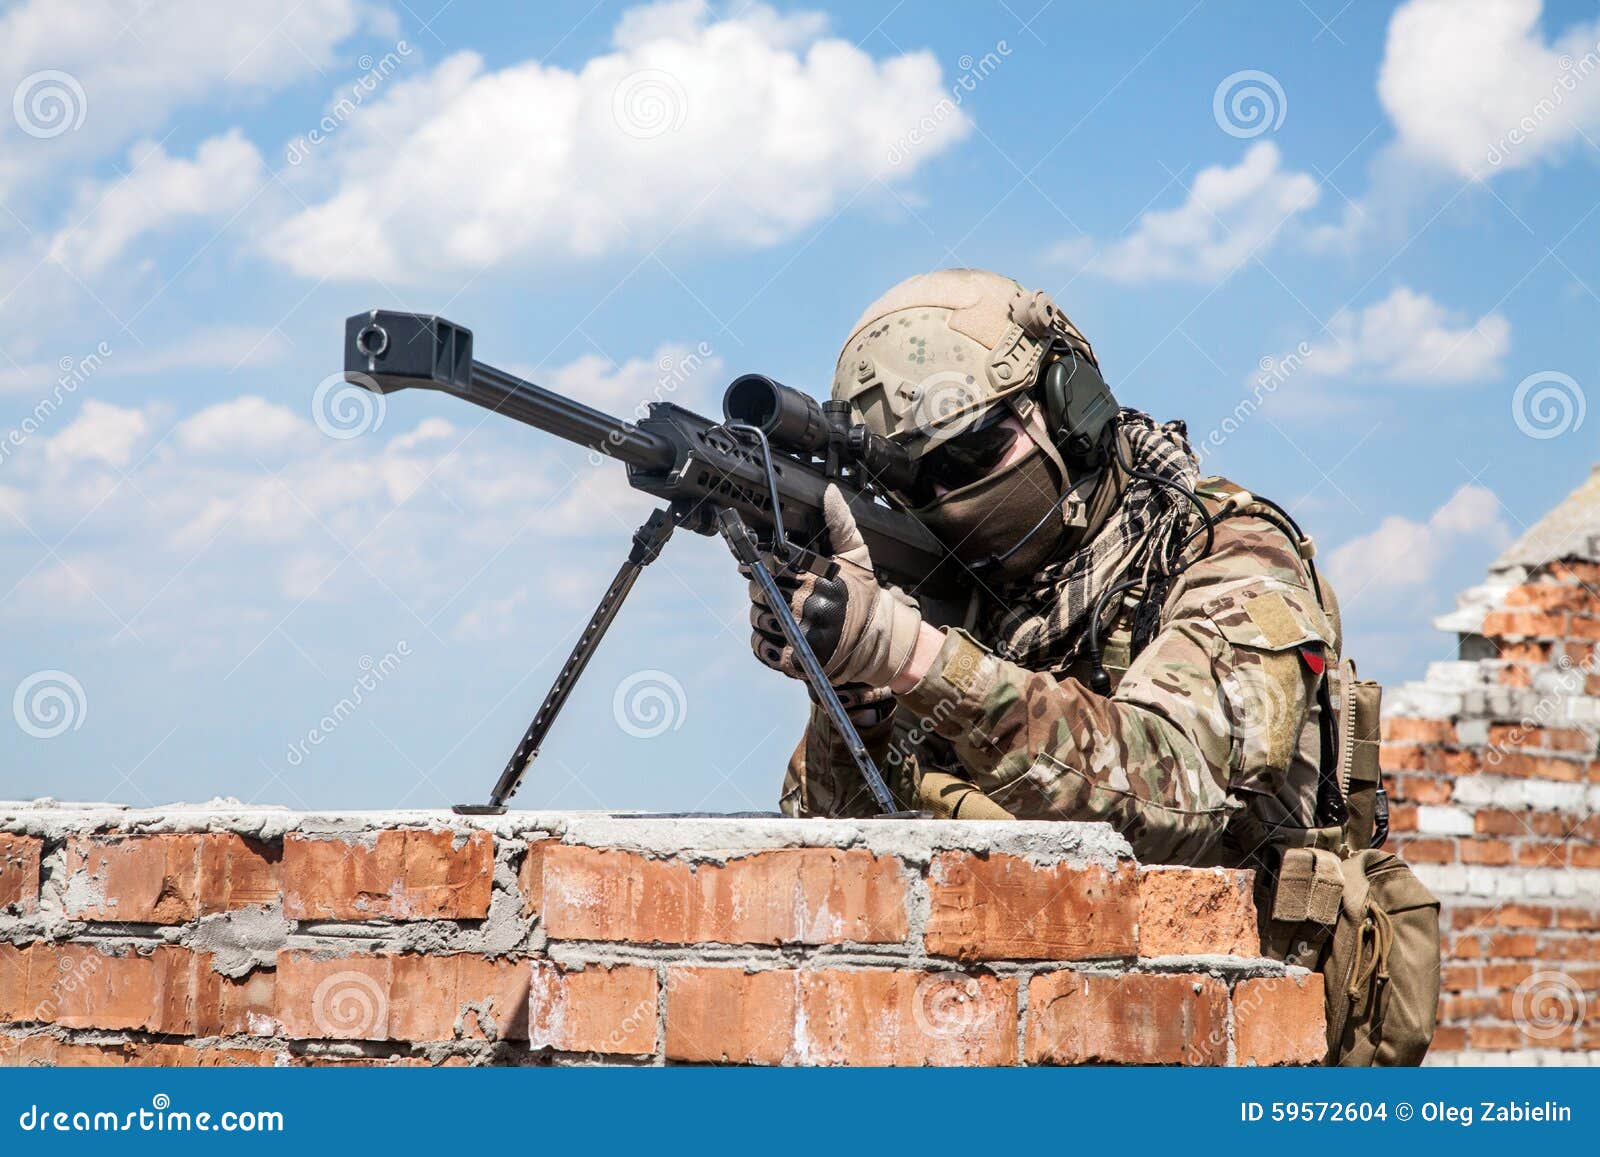 Army ranger sniper stock photo. Image of states, recruit ...